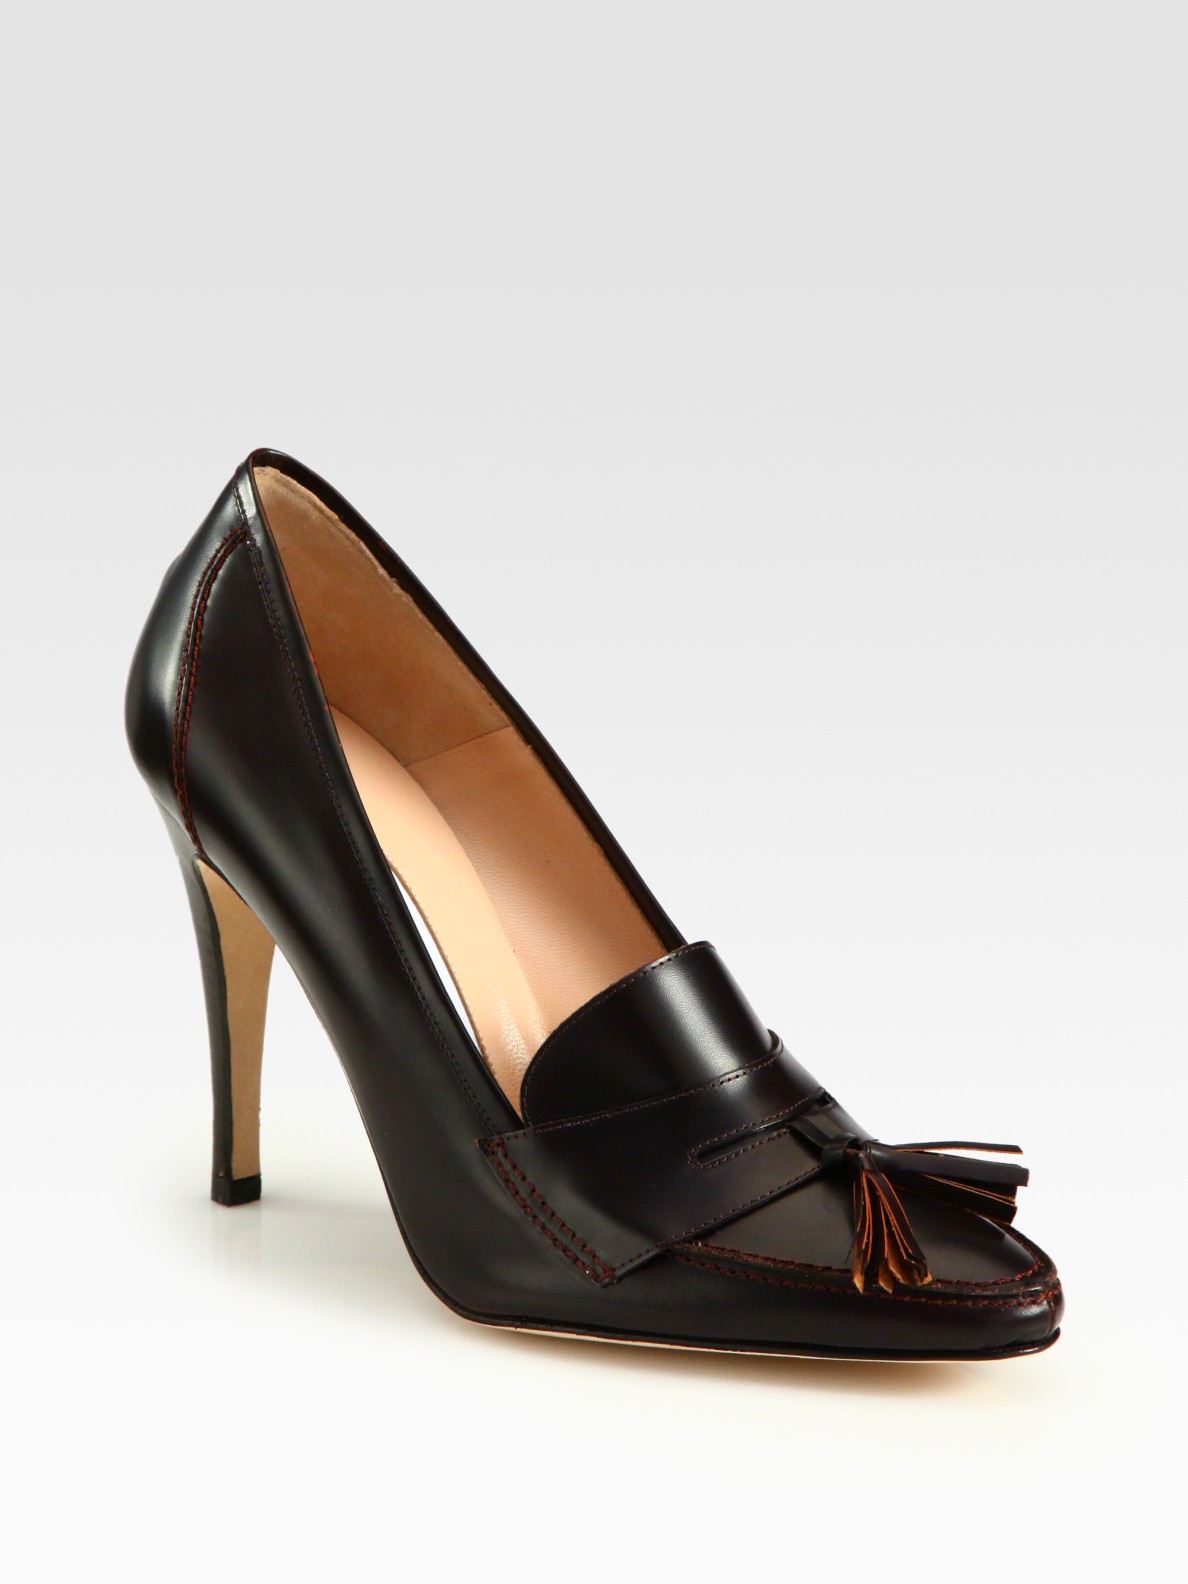 Manolo Blahnik Leather Loafer Pumps in Brown | Lyst